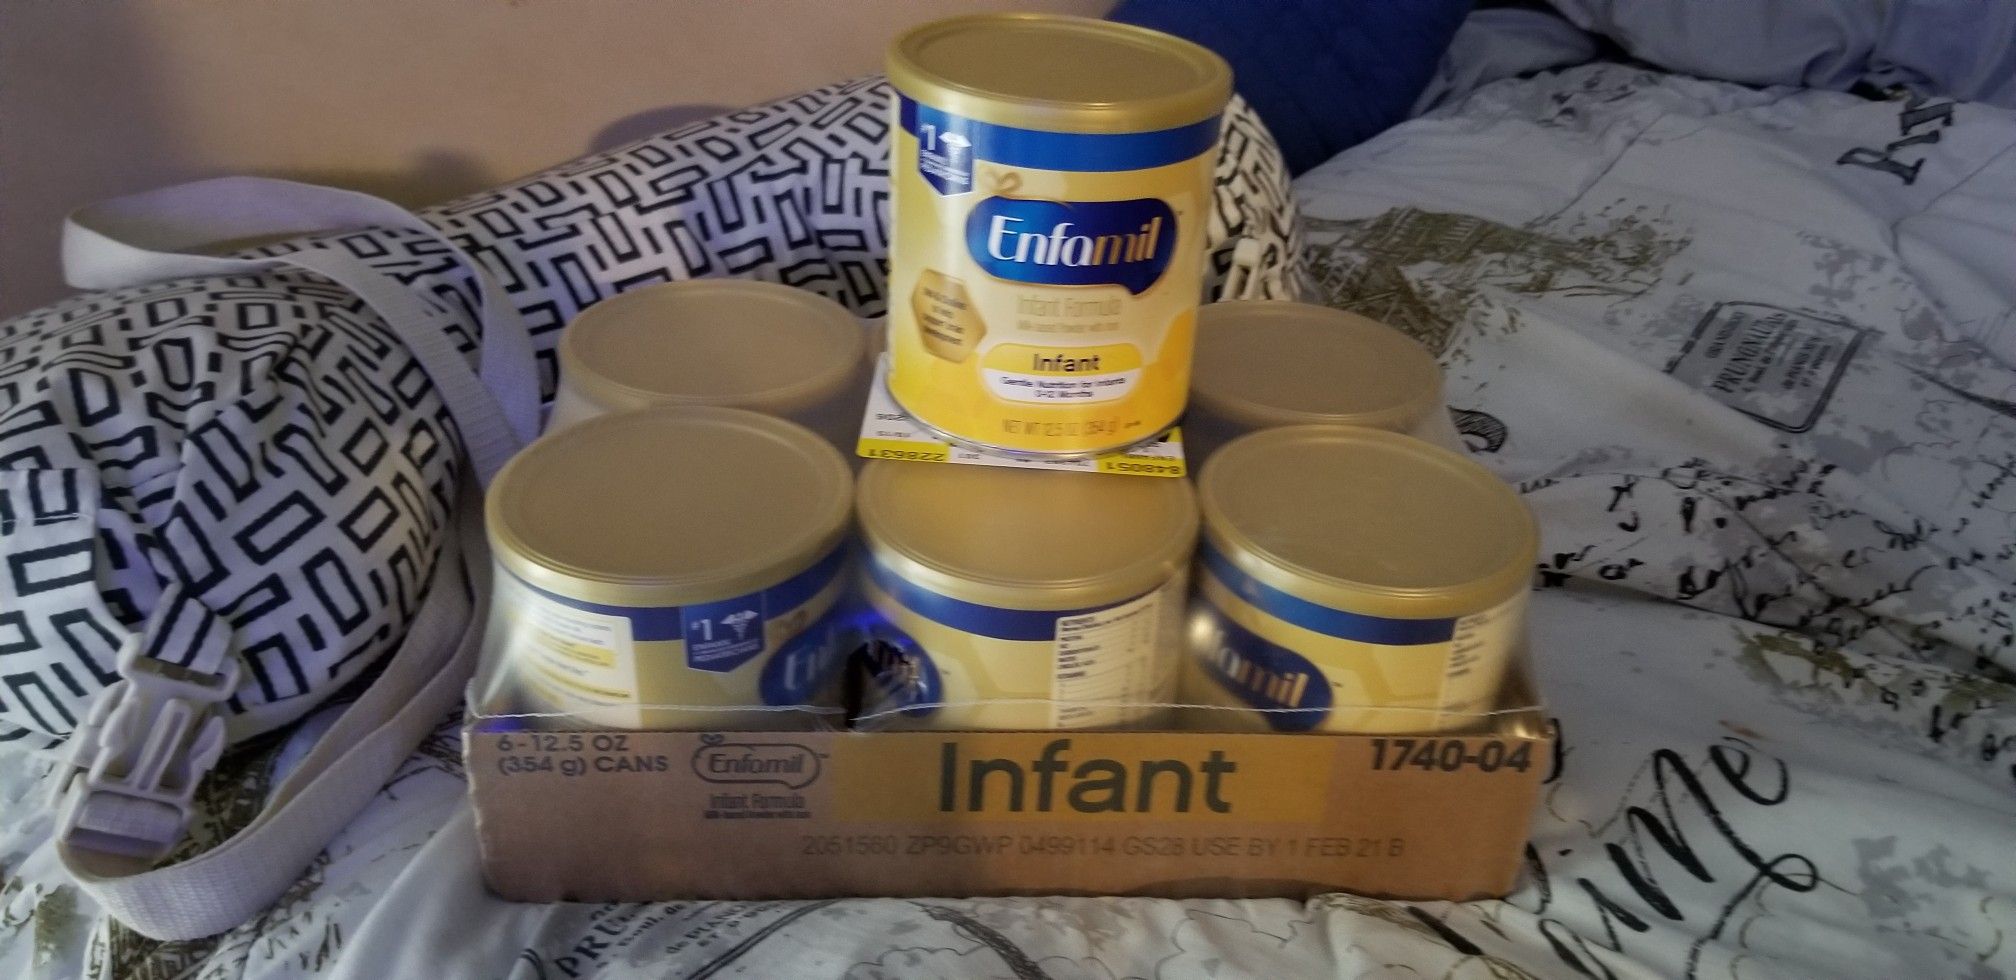 Enfamil and huggies diapers size 1